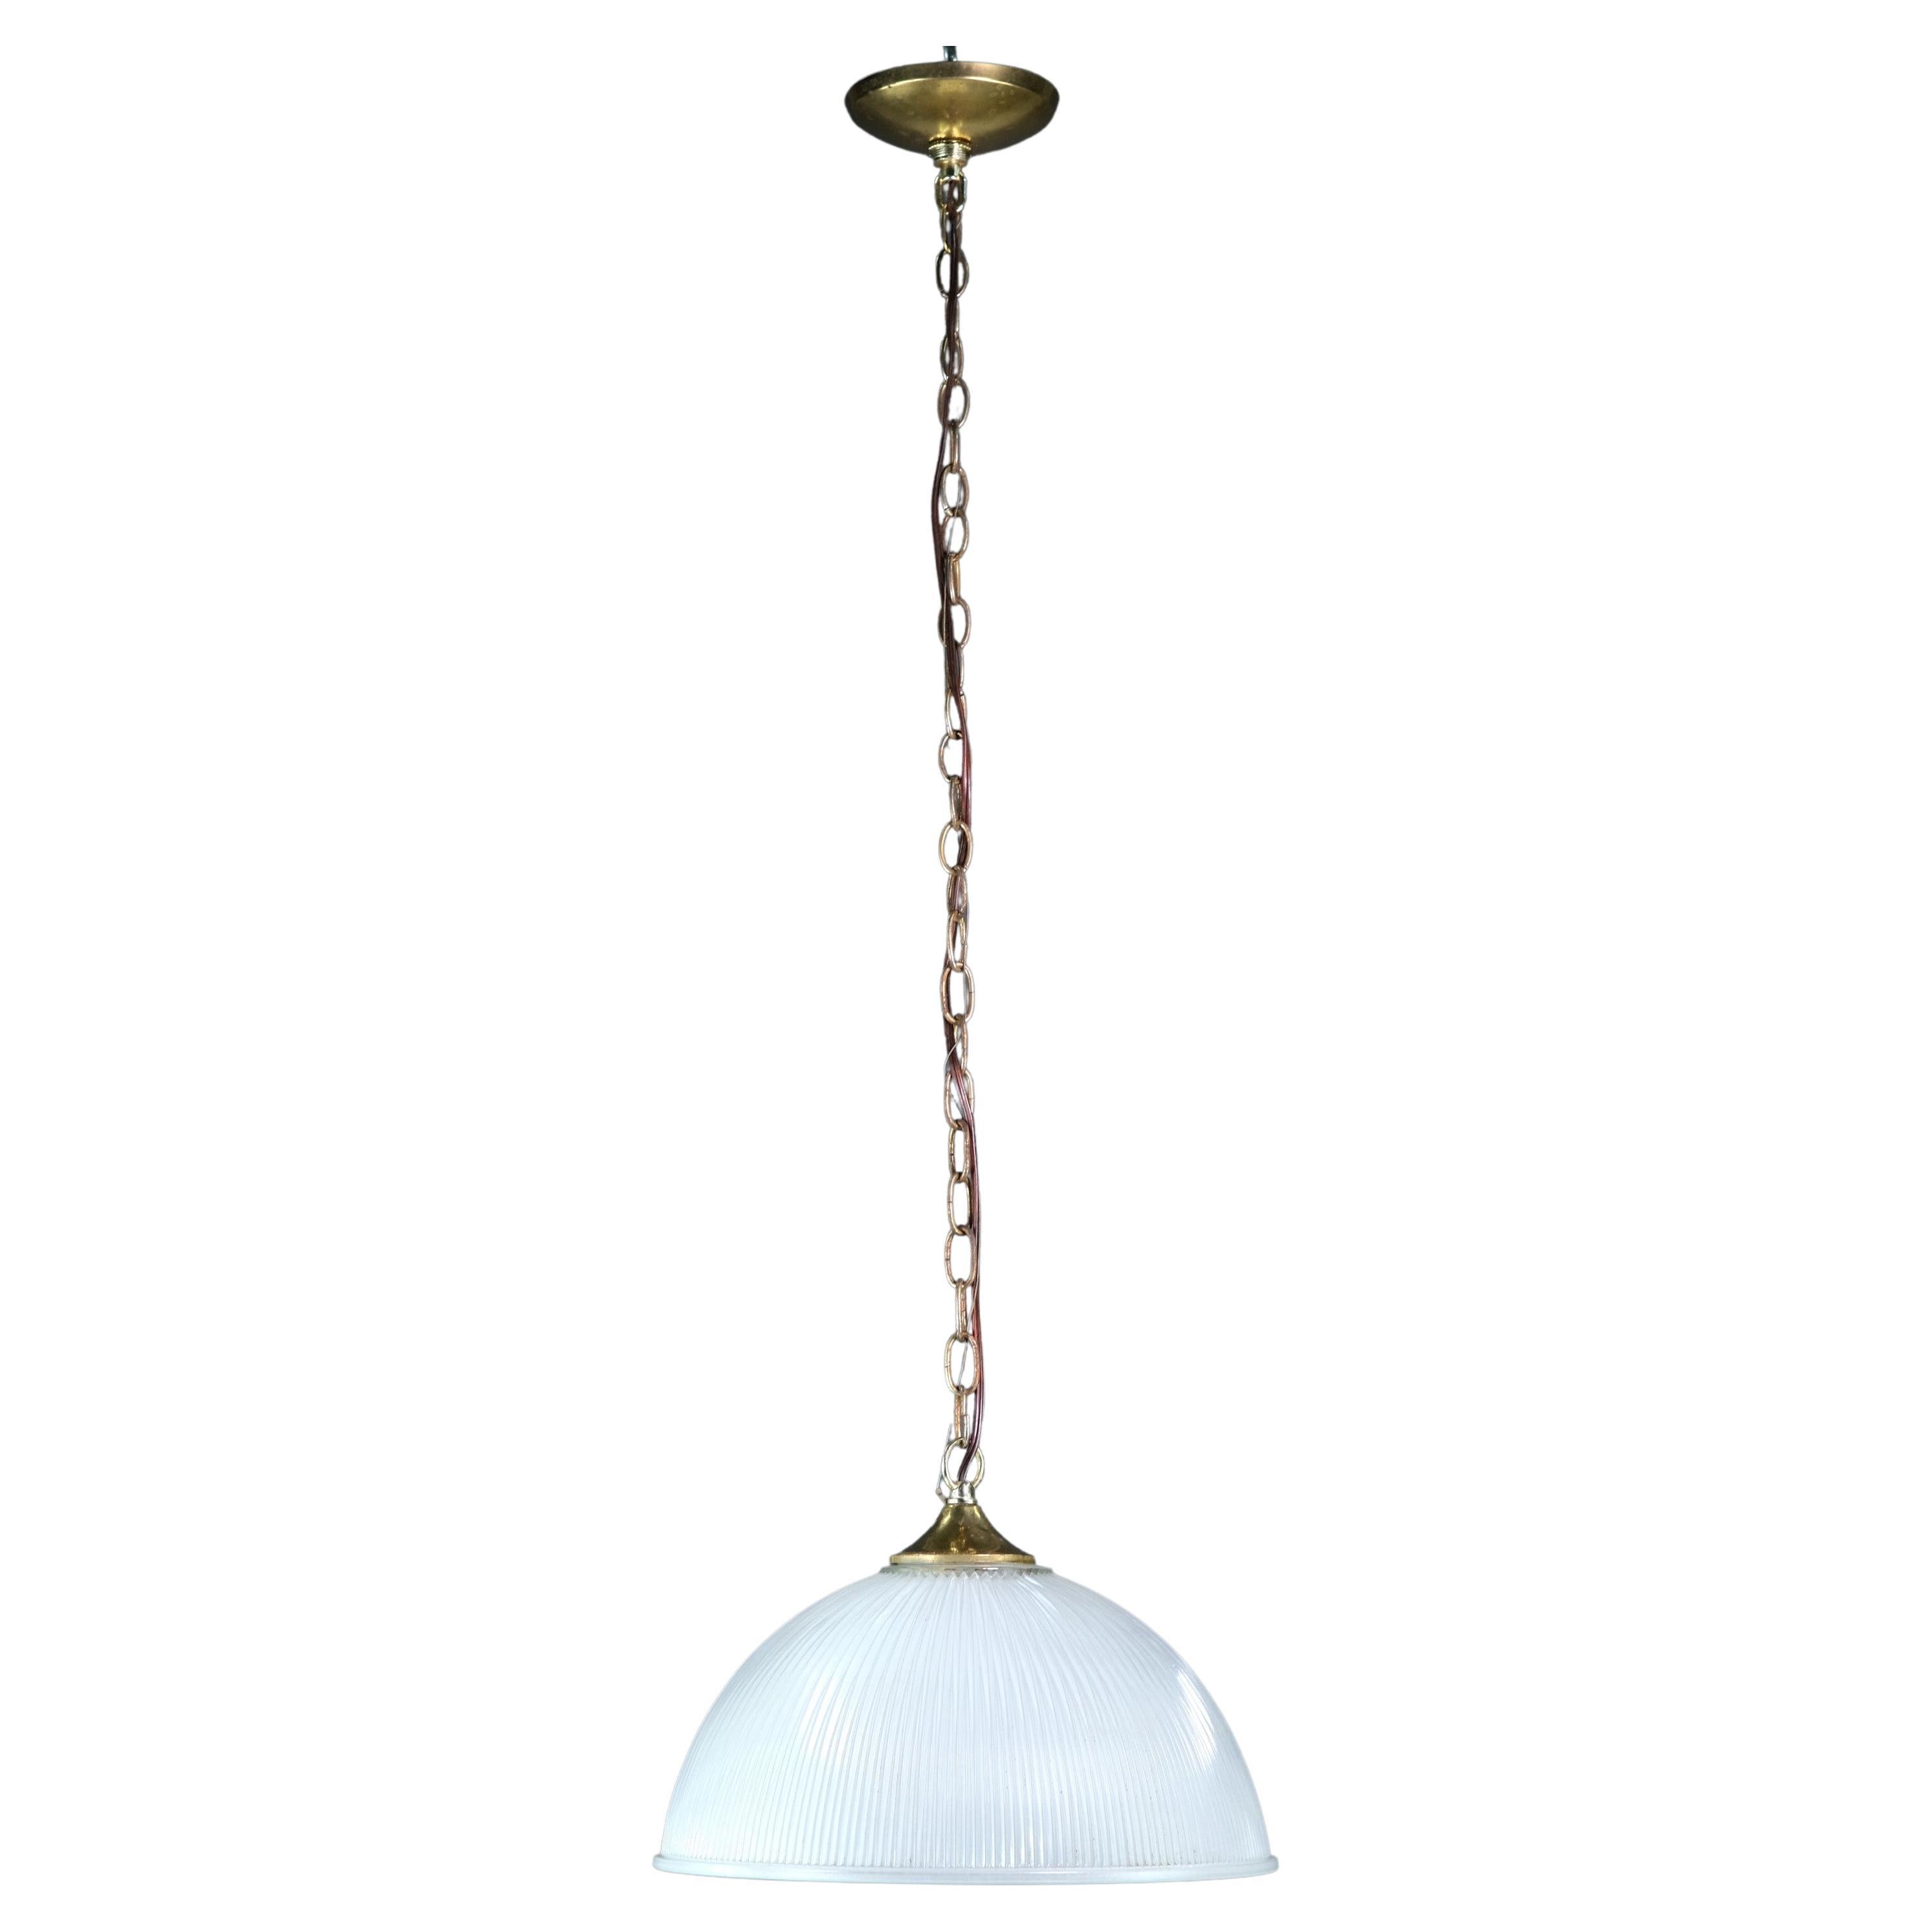 Fluted Frosted Glass Pendant Light Brass Hardware Half Globe For Sale